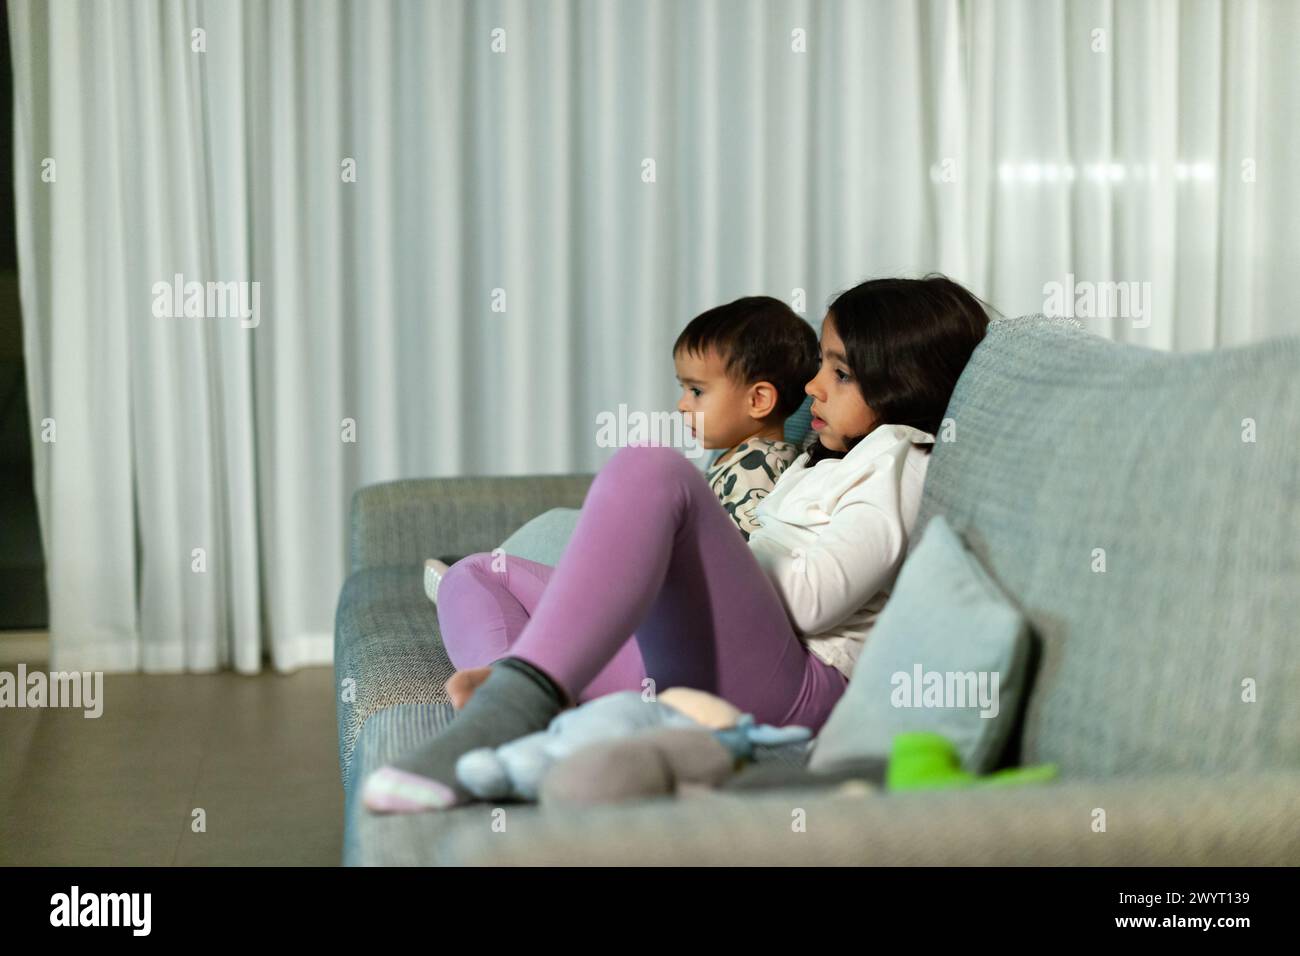 Children watching TV on the sofa at home Stock Photo